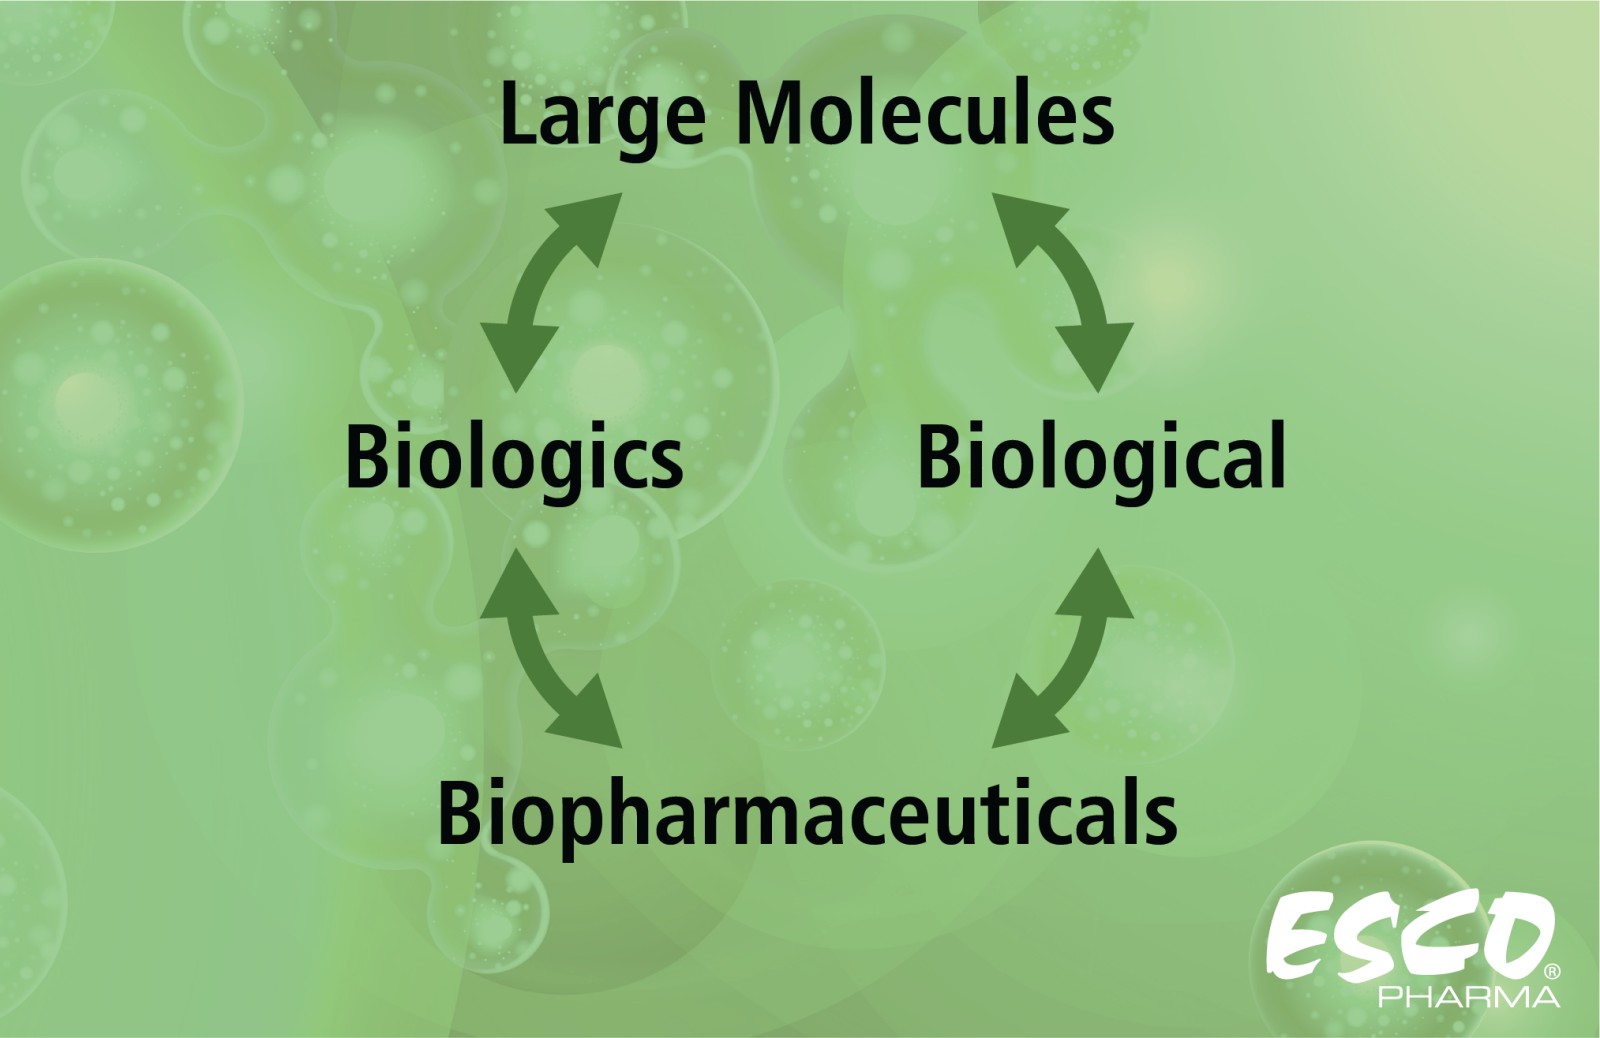 Interchangeable terms of Large Molecules, Biologics, Biological, and Biopharmaceutical